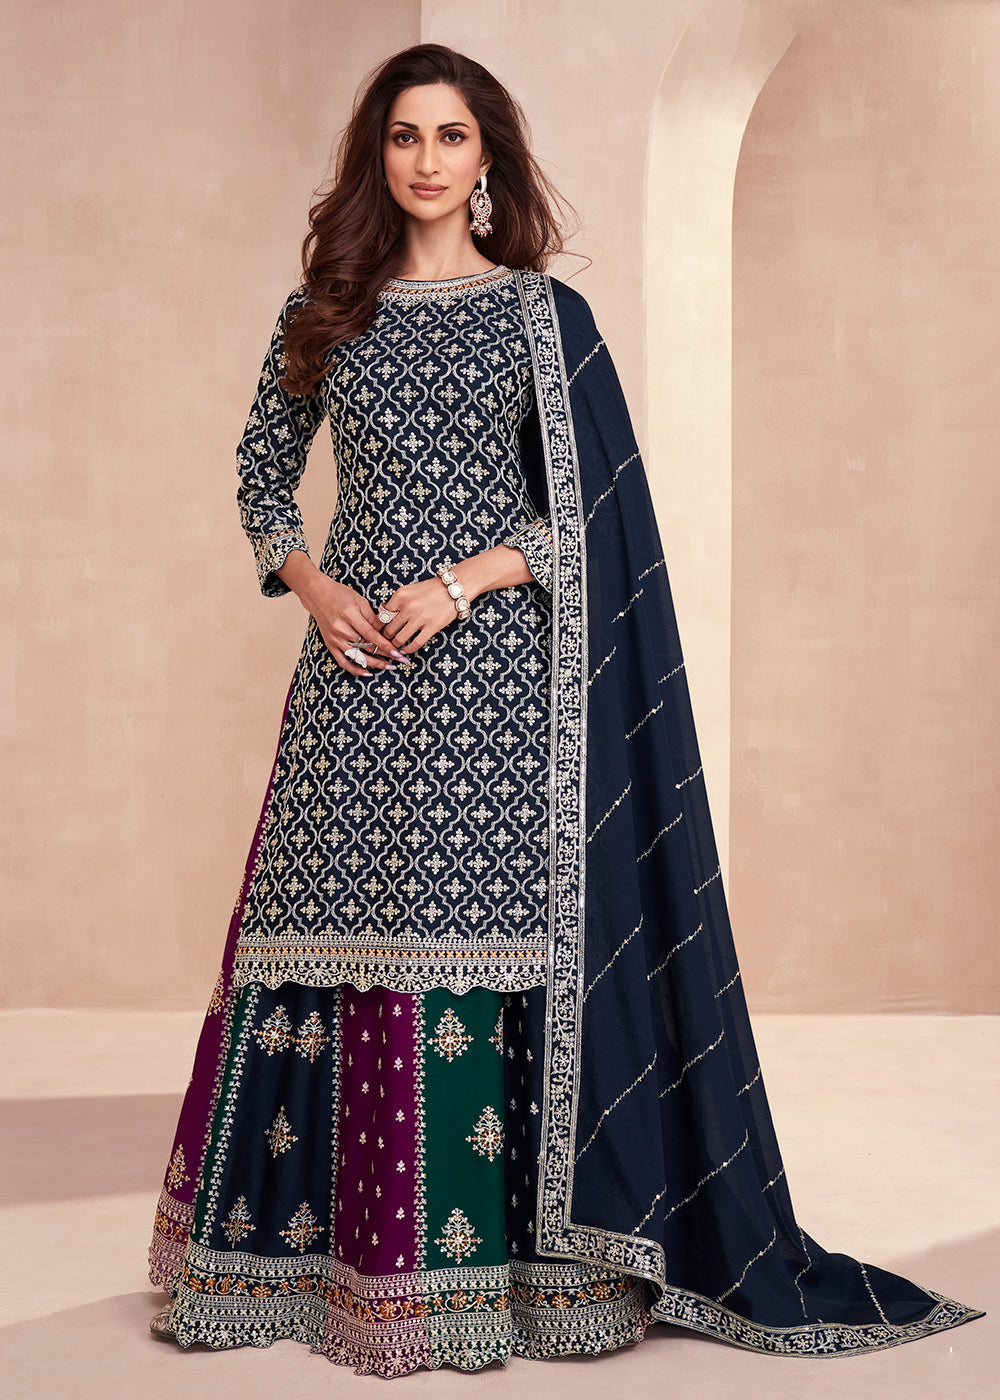 Buy Now Dark Blue Multicolor Sequins Embroidered Lehenga Skirt Suit Online in USA, UK, Australia, New Zealand, Canada & Worldwide at Empress Clothing. 